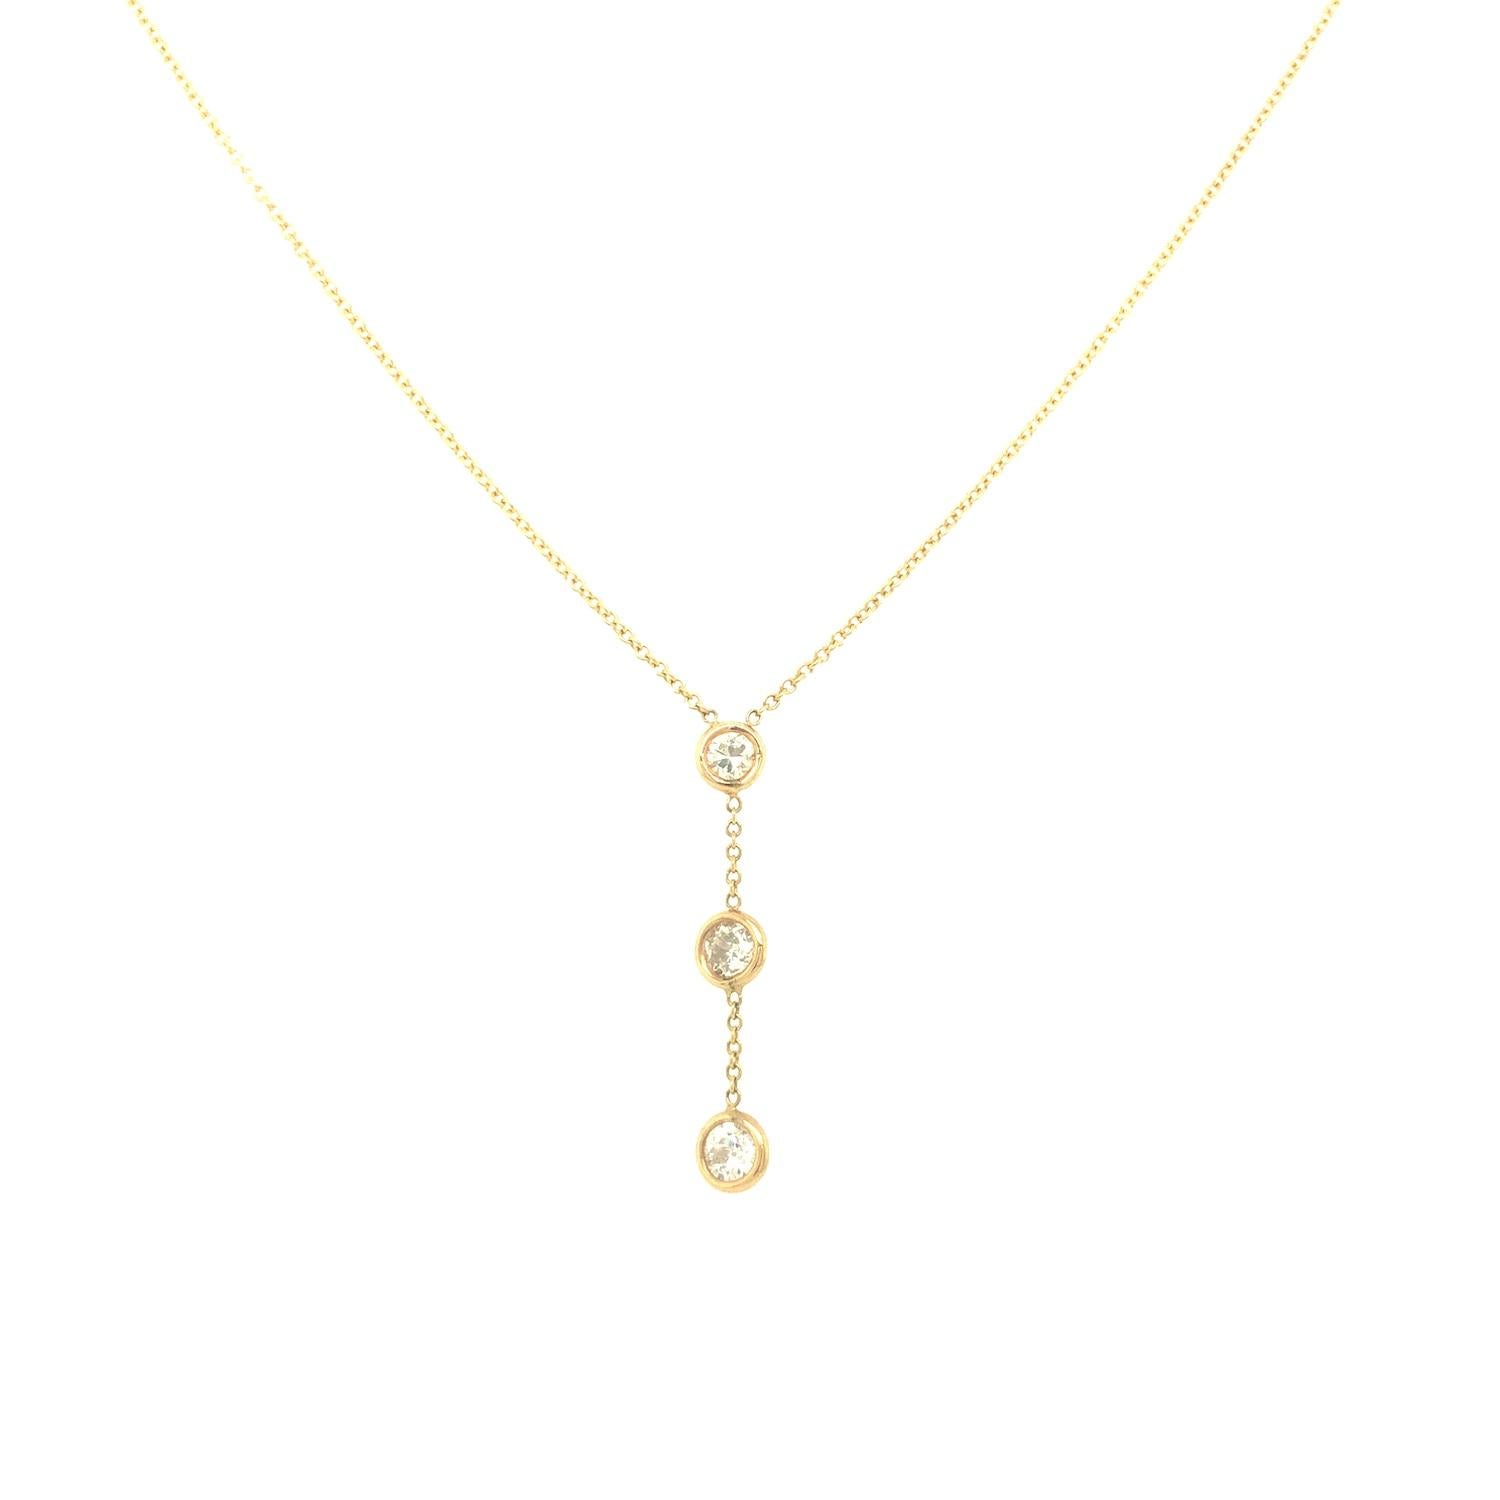 This sweet and fun Y-shaped necklace features three round brilliant cut diamonds set in bezel setting, dangling on 14K yellow gold simple chain. The diamonds weigh 0.50 carat total weight and are G-H color and VS2-SI1 clarity. The necklace measures 